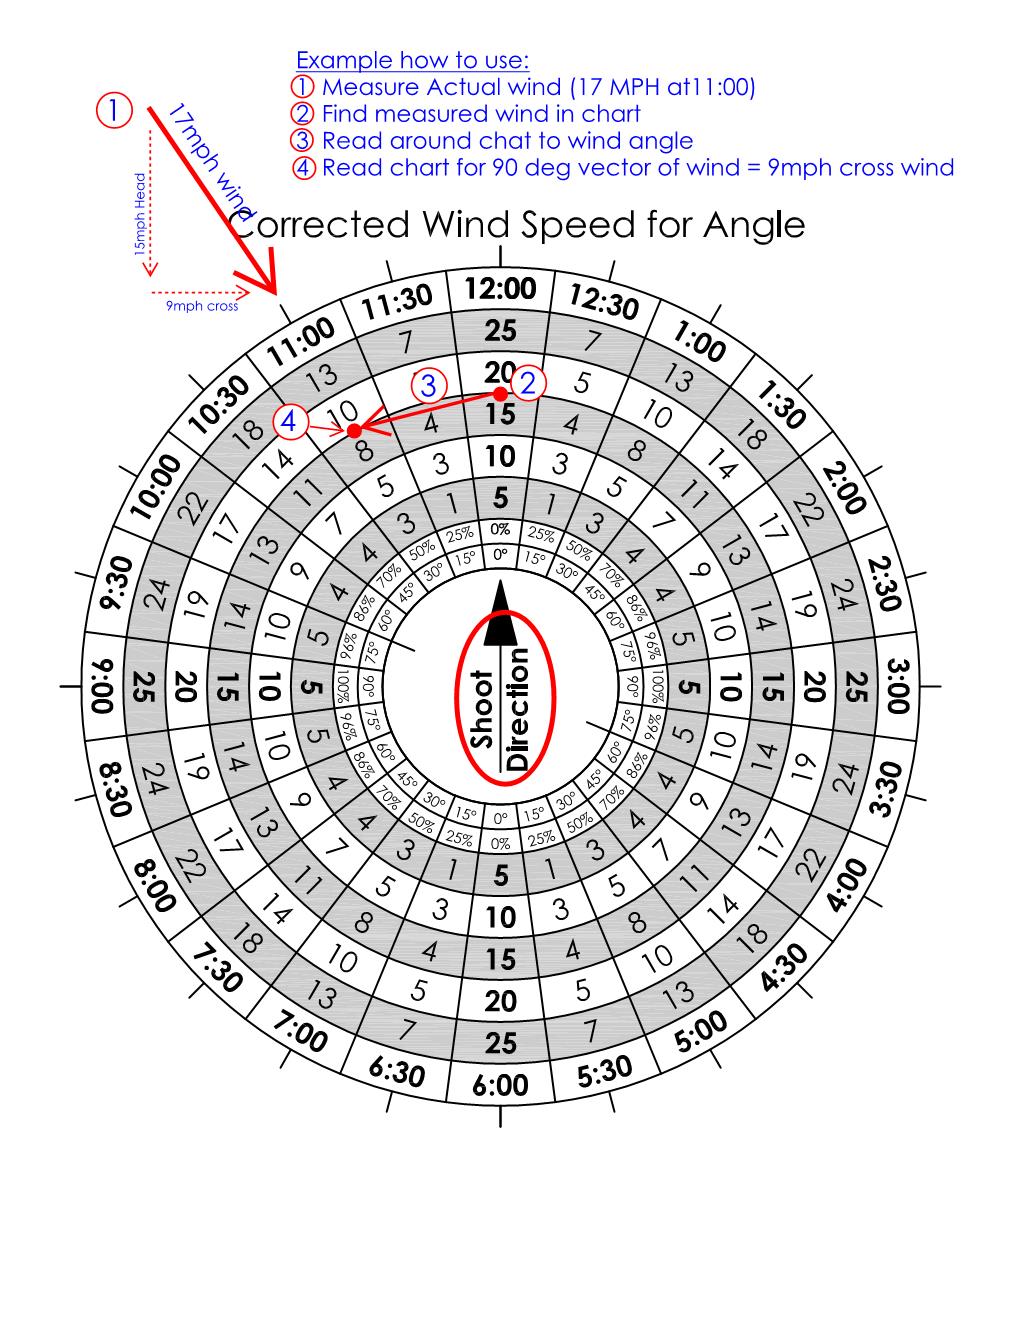 HOW TO Wind Rose - Corrected wind speed for Angle.jpg